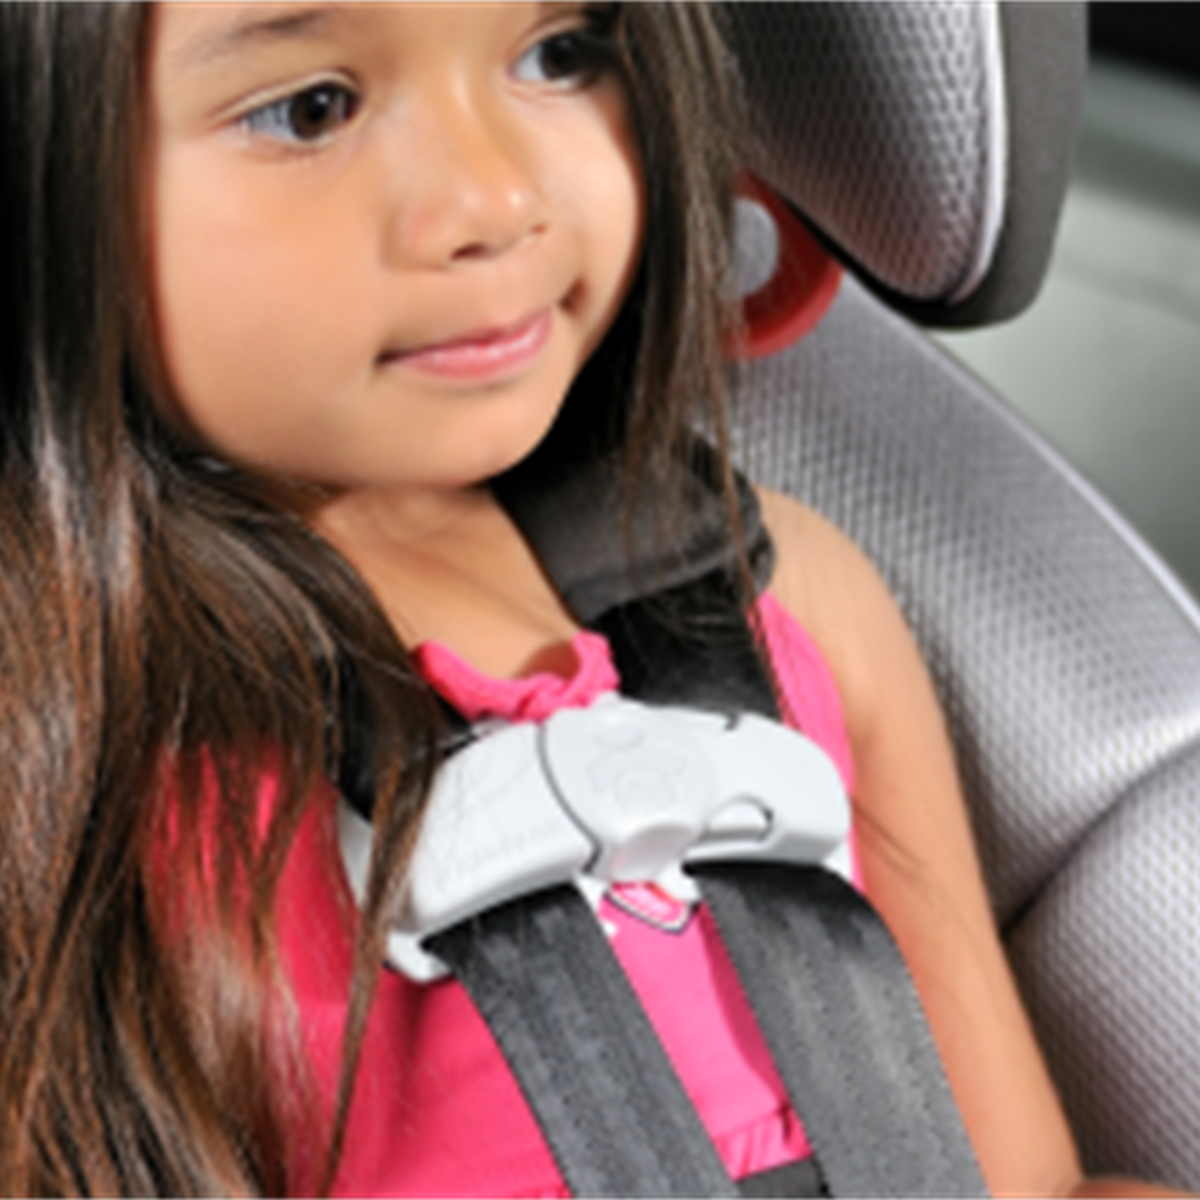 Car Seats Information For Families, What S The Weight Limit For Forward Facing Car Seats